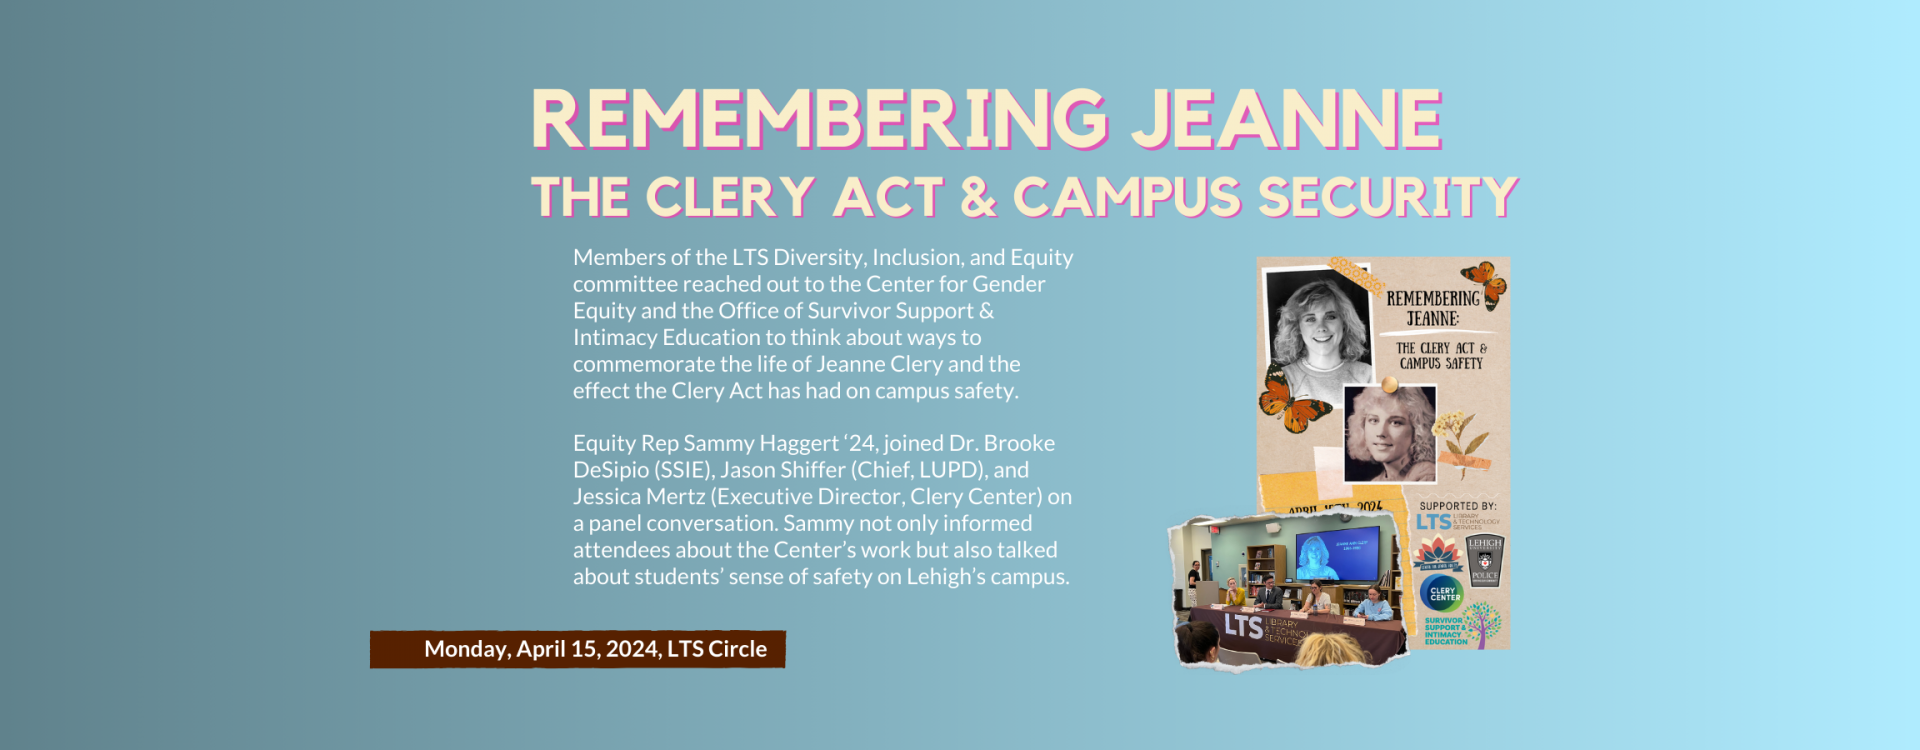 Members of the LTS Diversity, Inclusion, and Equity committee reached out to the Center for Gender Equity and the Office of Survivor Support & Intimacy Education to think about ways to commemorate the life of Jeanne Clery and the effect the Clery Act has had on campus safety.  Equity Rep Sammy Haggert ‘24, joined Dr. Brooke DeSipio (SSIE), Jason Shiffer (Chief, LUPD), and Jessica Mertz (Executive Director, Clery Center) on a panel conversation. Sammy not only informed attendees about the Center’s work but a